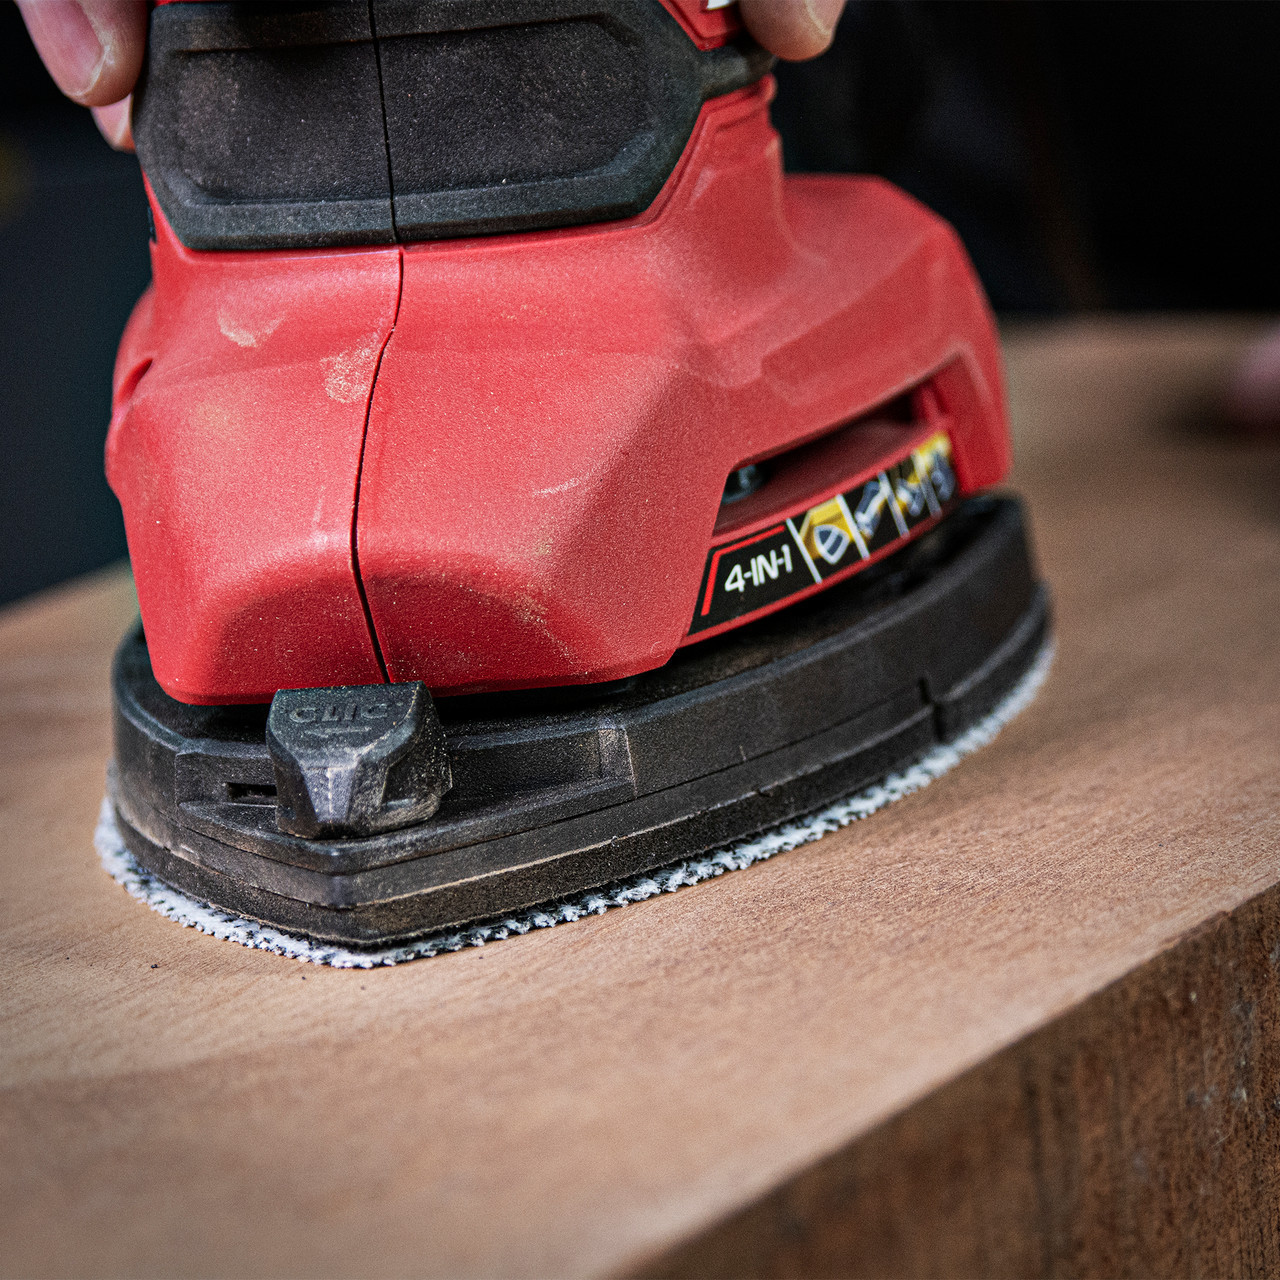 Detail Sander Applications Include flat areas, sanding into corners, keying, preparation, cleaning and fine finishing